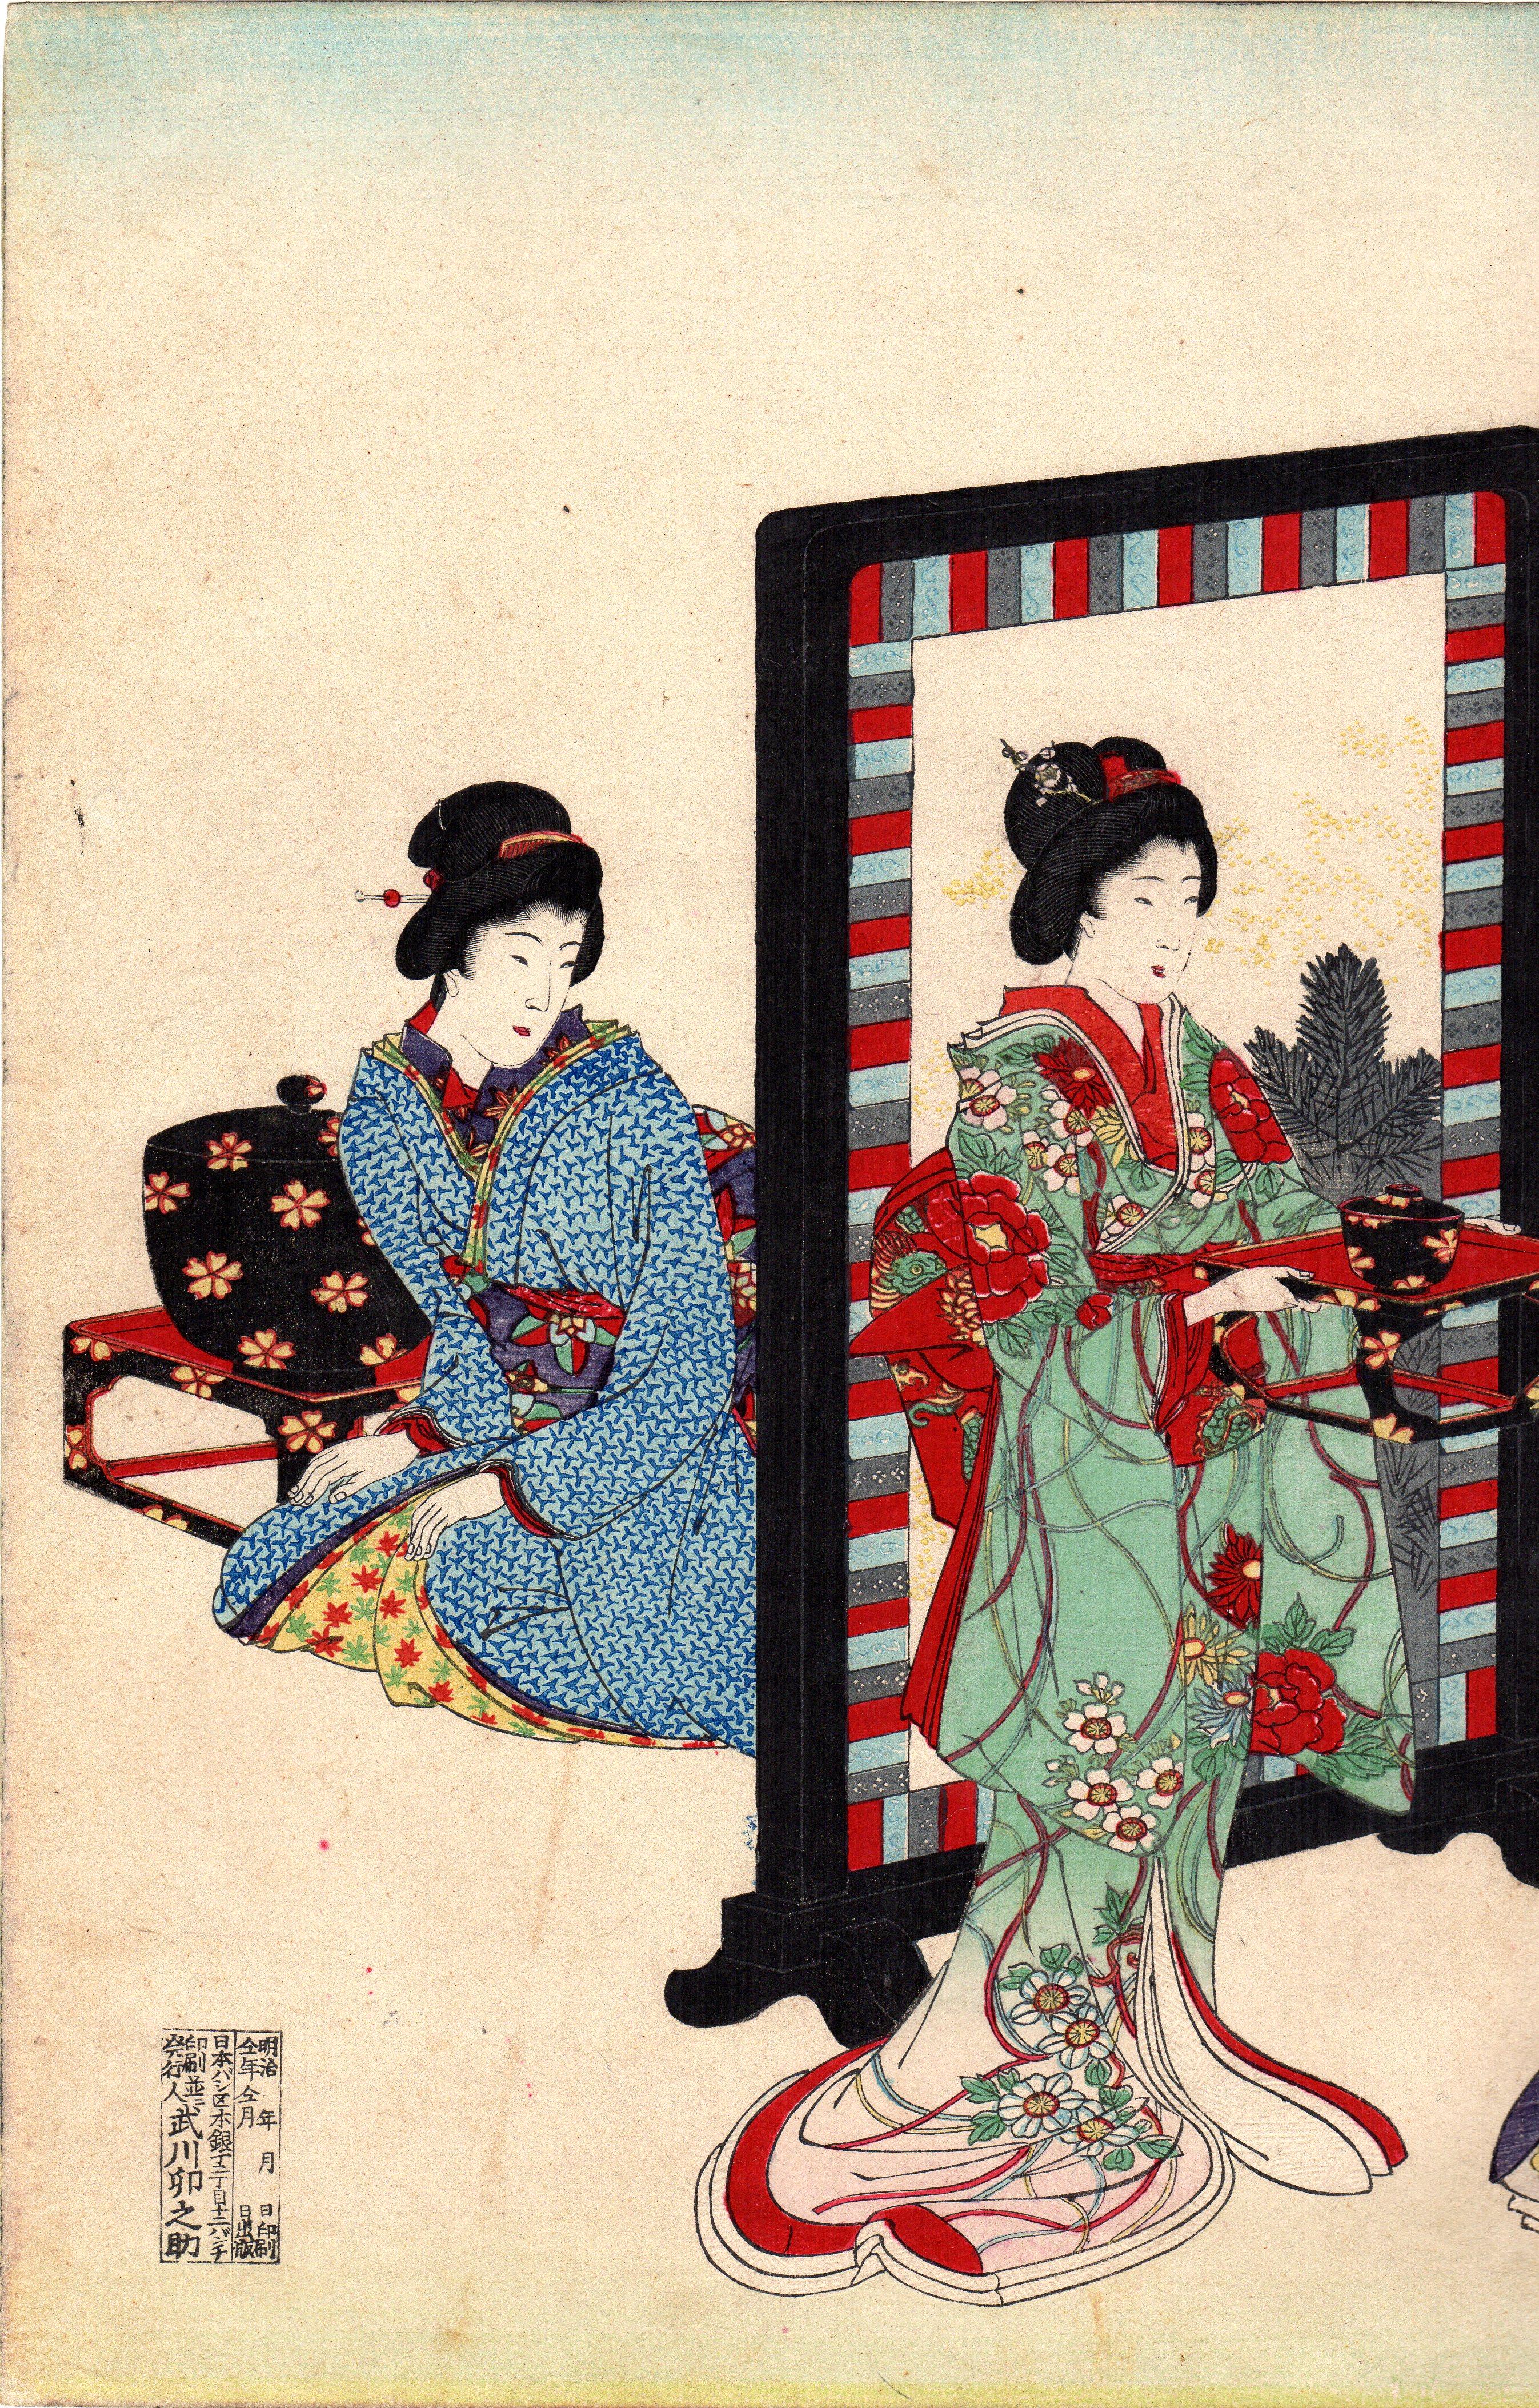 19th Century Original Japanese Triptych Color Woodblock Print by Toyohara Chikanobu For Sale